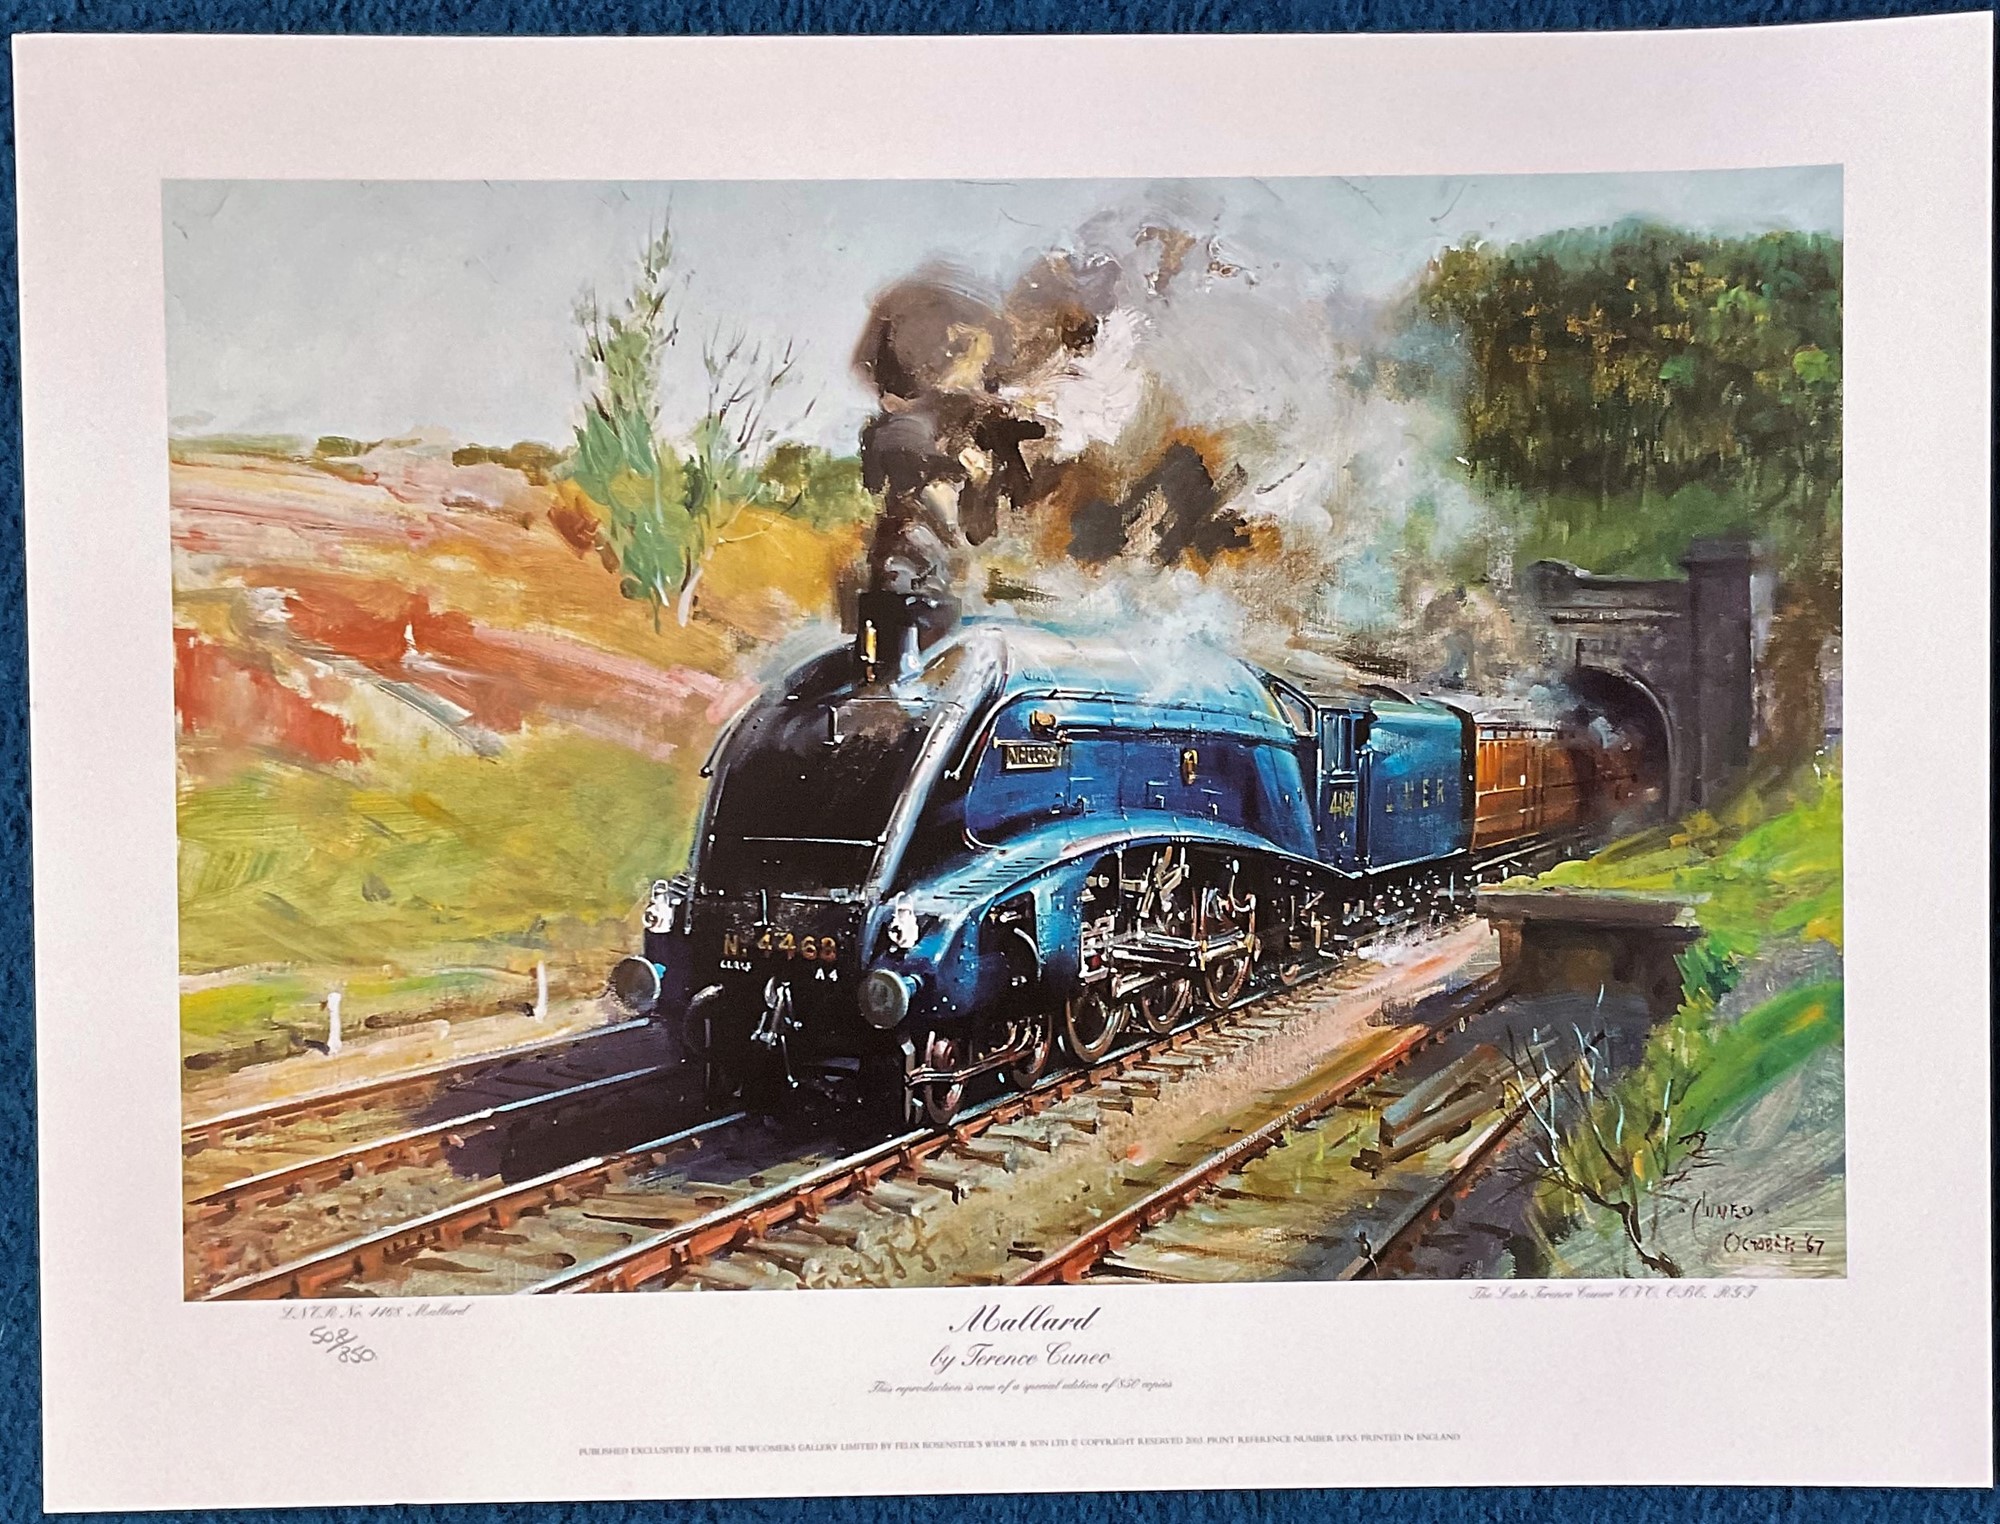 Mallard by Terence Cuneo , limited edition number 508 of 850, approx 14x18. The magnificent